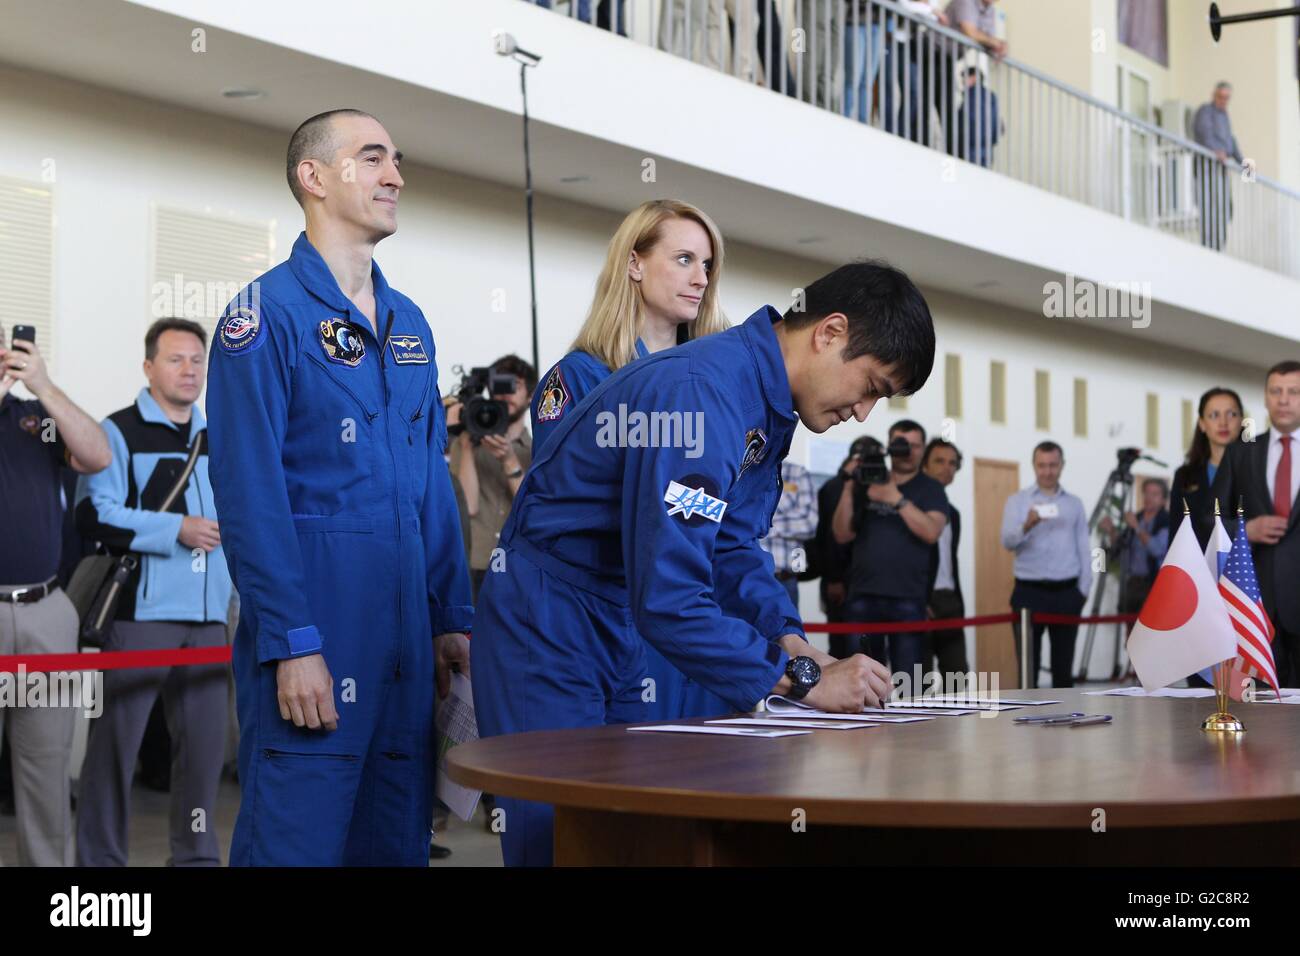 International Space Station Expedition 48 prime crew sign in for final flight exams pose at the Gagarin Cosmonaut Training Center May 26, 2016 in Star City, Russia. Crewmembers from L-R are: Russian cosmonaut Anatoly Ivanishin, Japanese astronaut Takuya Onishi and NASA astronaut Kate Rubins. Stock Photo